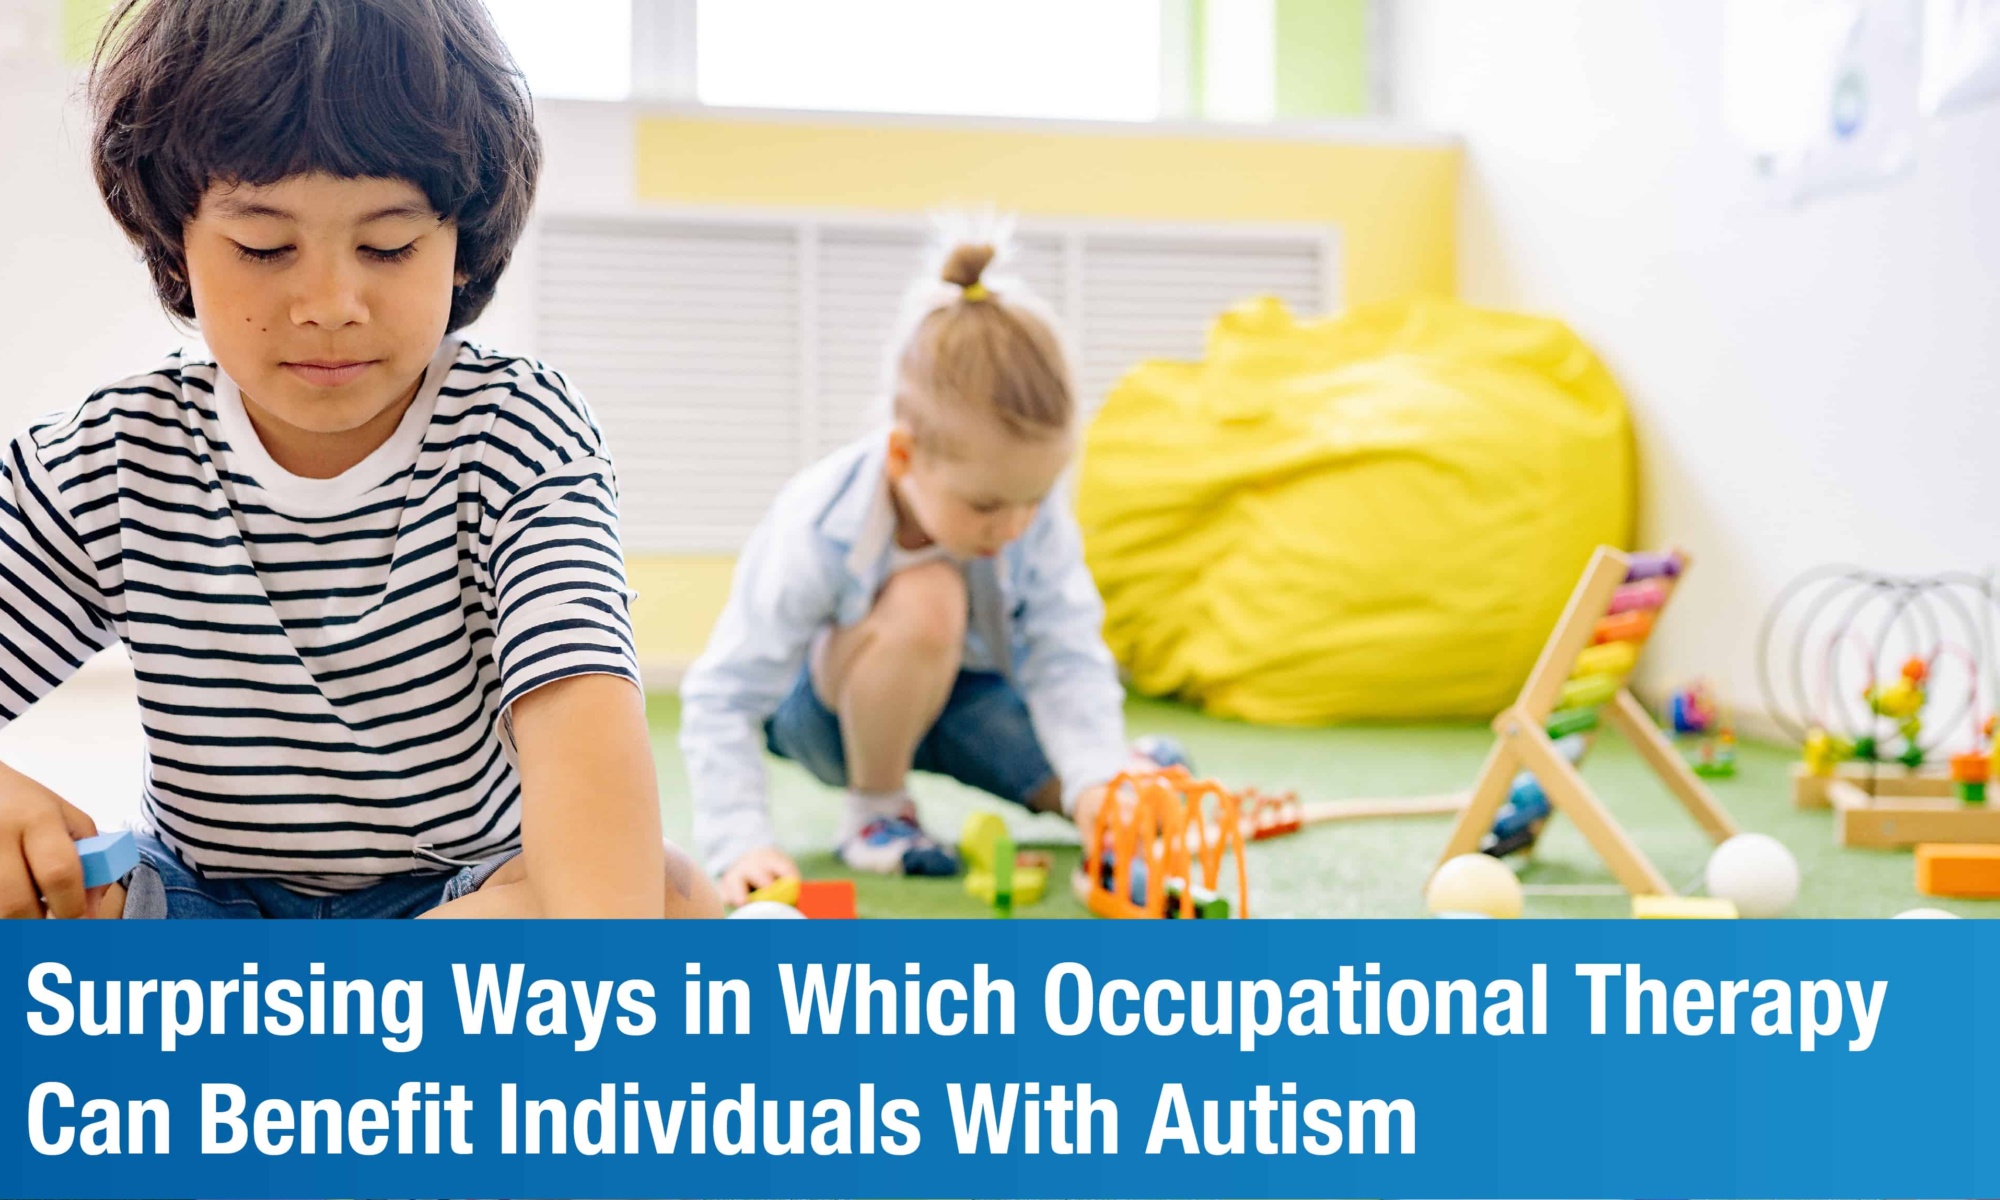 Occupational Therapy for Autism: How It Can Help